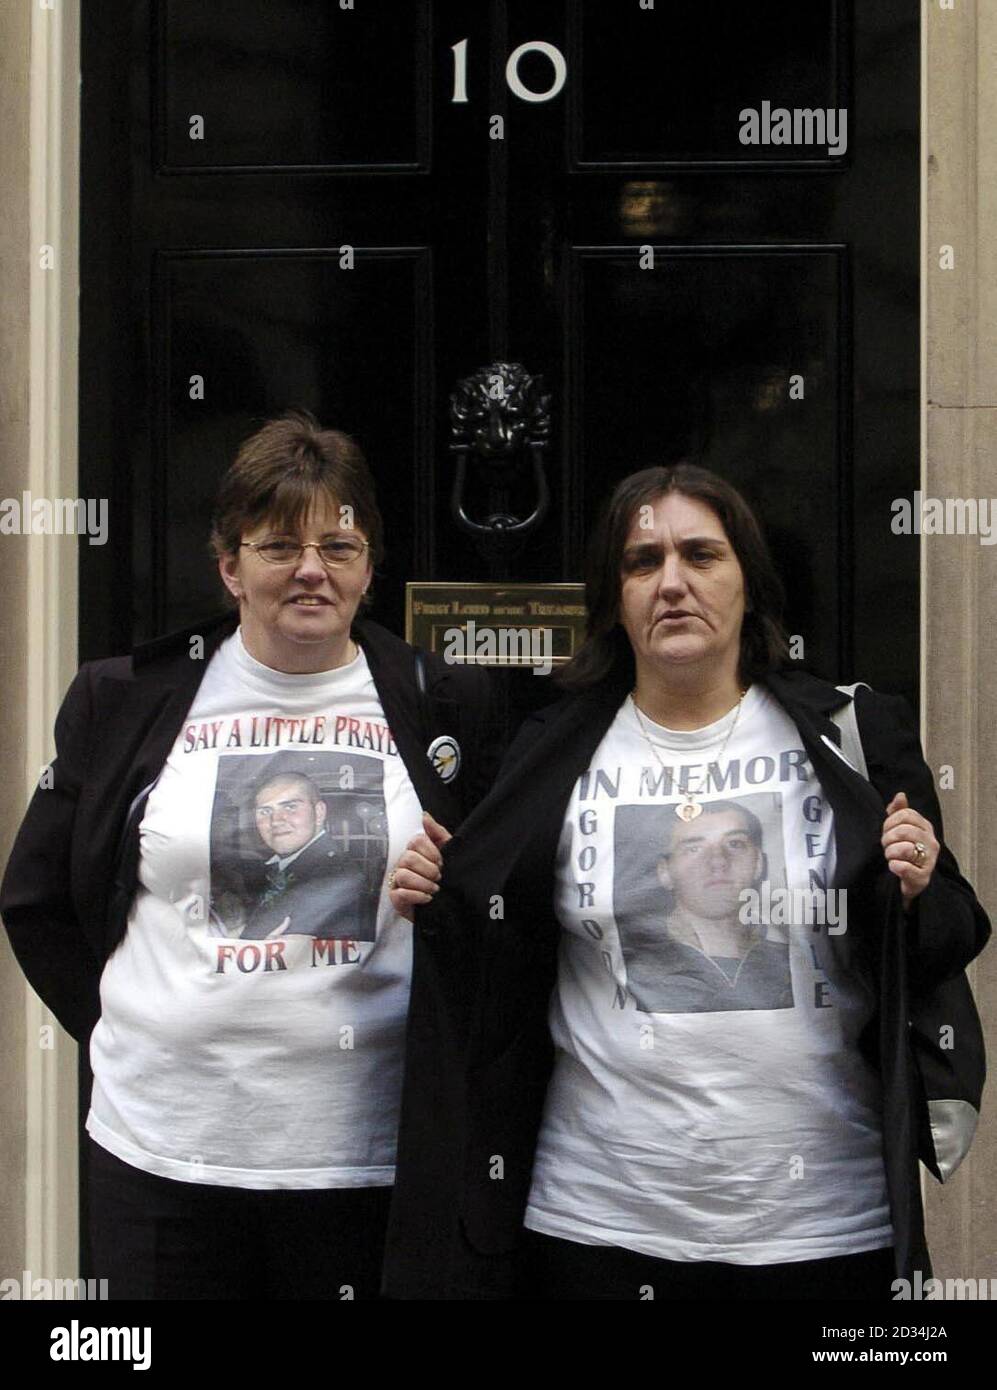 Janet Lowrie who has two sons serving in Iraq and Rose Gentle whose son, Fusilier Gordon Gentle, was killed in June 2004, arrive at Downing Street in central London, Wednesday March 1, 2006, to deliver a letter from Military Families Against The War, an organisation requesting the withdrawal of British troops in the region. See PA story POLITICS Iraq. PRESS ASSOCIATION Photo. Photo credit should read: Ian Nicholson/PA Stock Photo